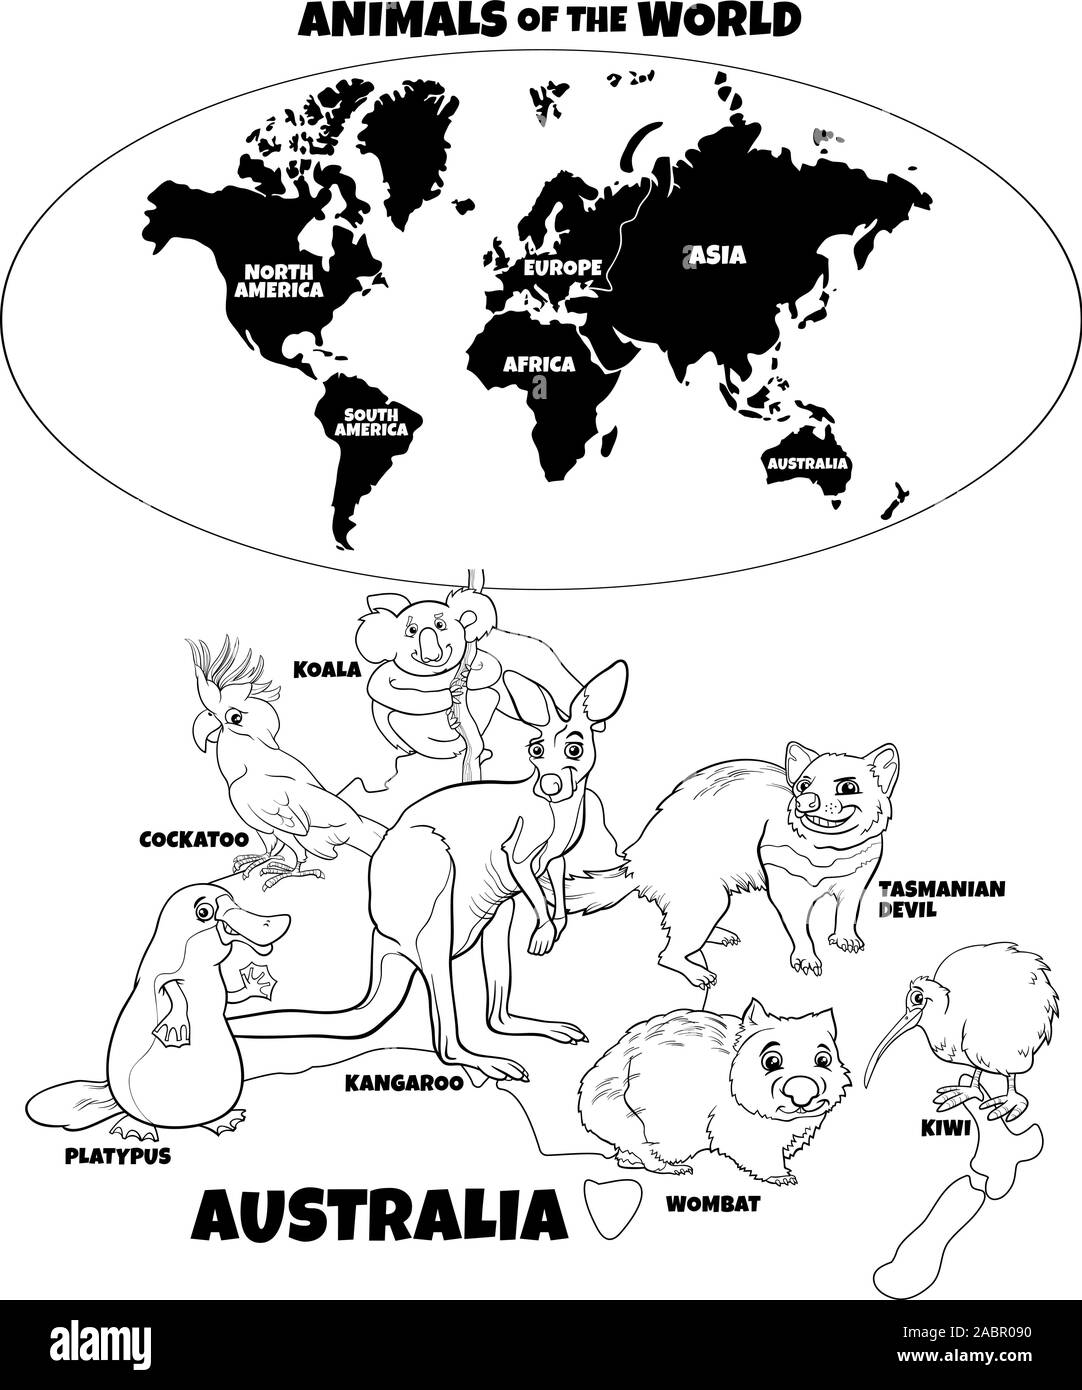 Download Black And White Educational Cartoon Illustration Of Australian Animals And World Map With Continents Coloring Book Page Stock Vector Image Art Alamy